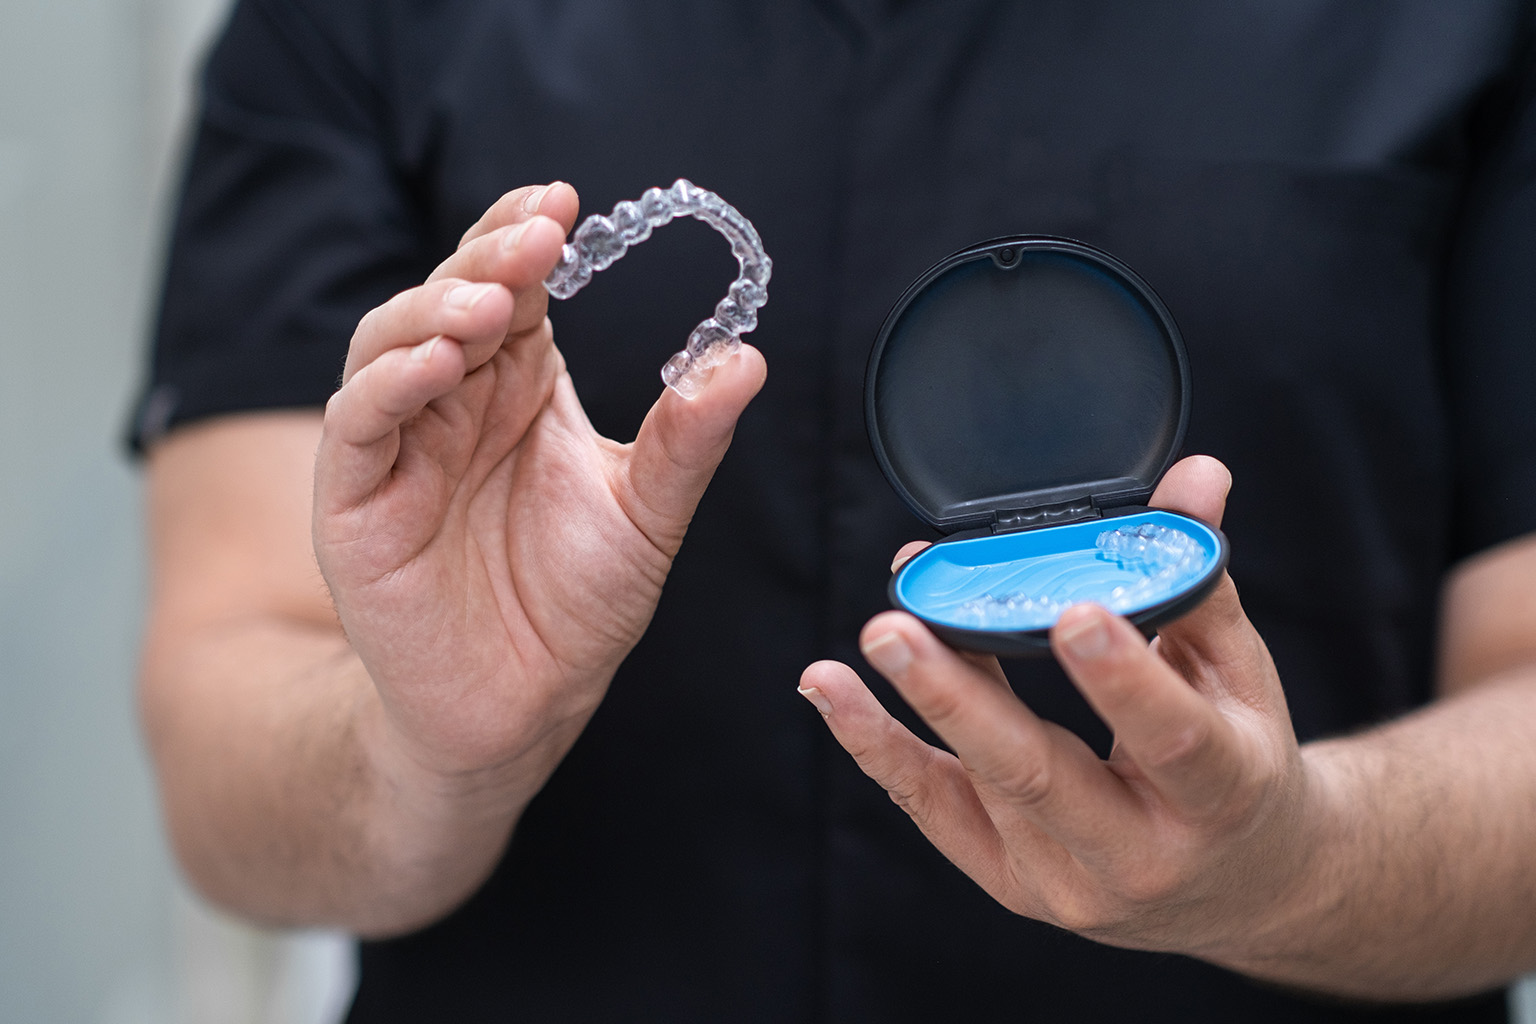 hands holding clear aligners and case